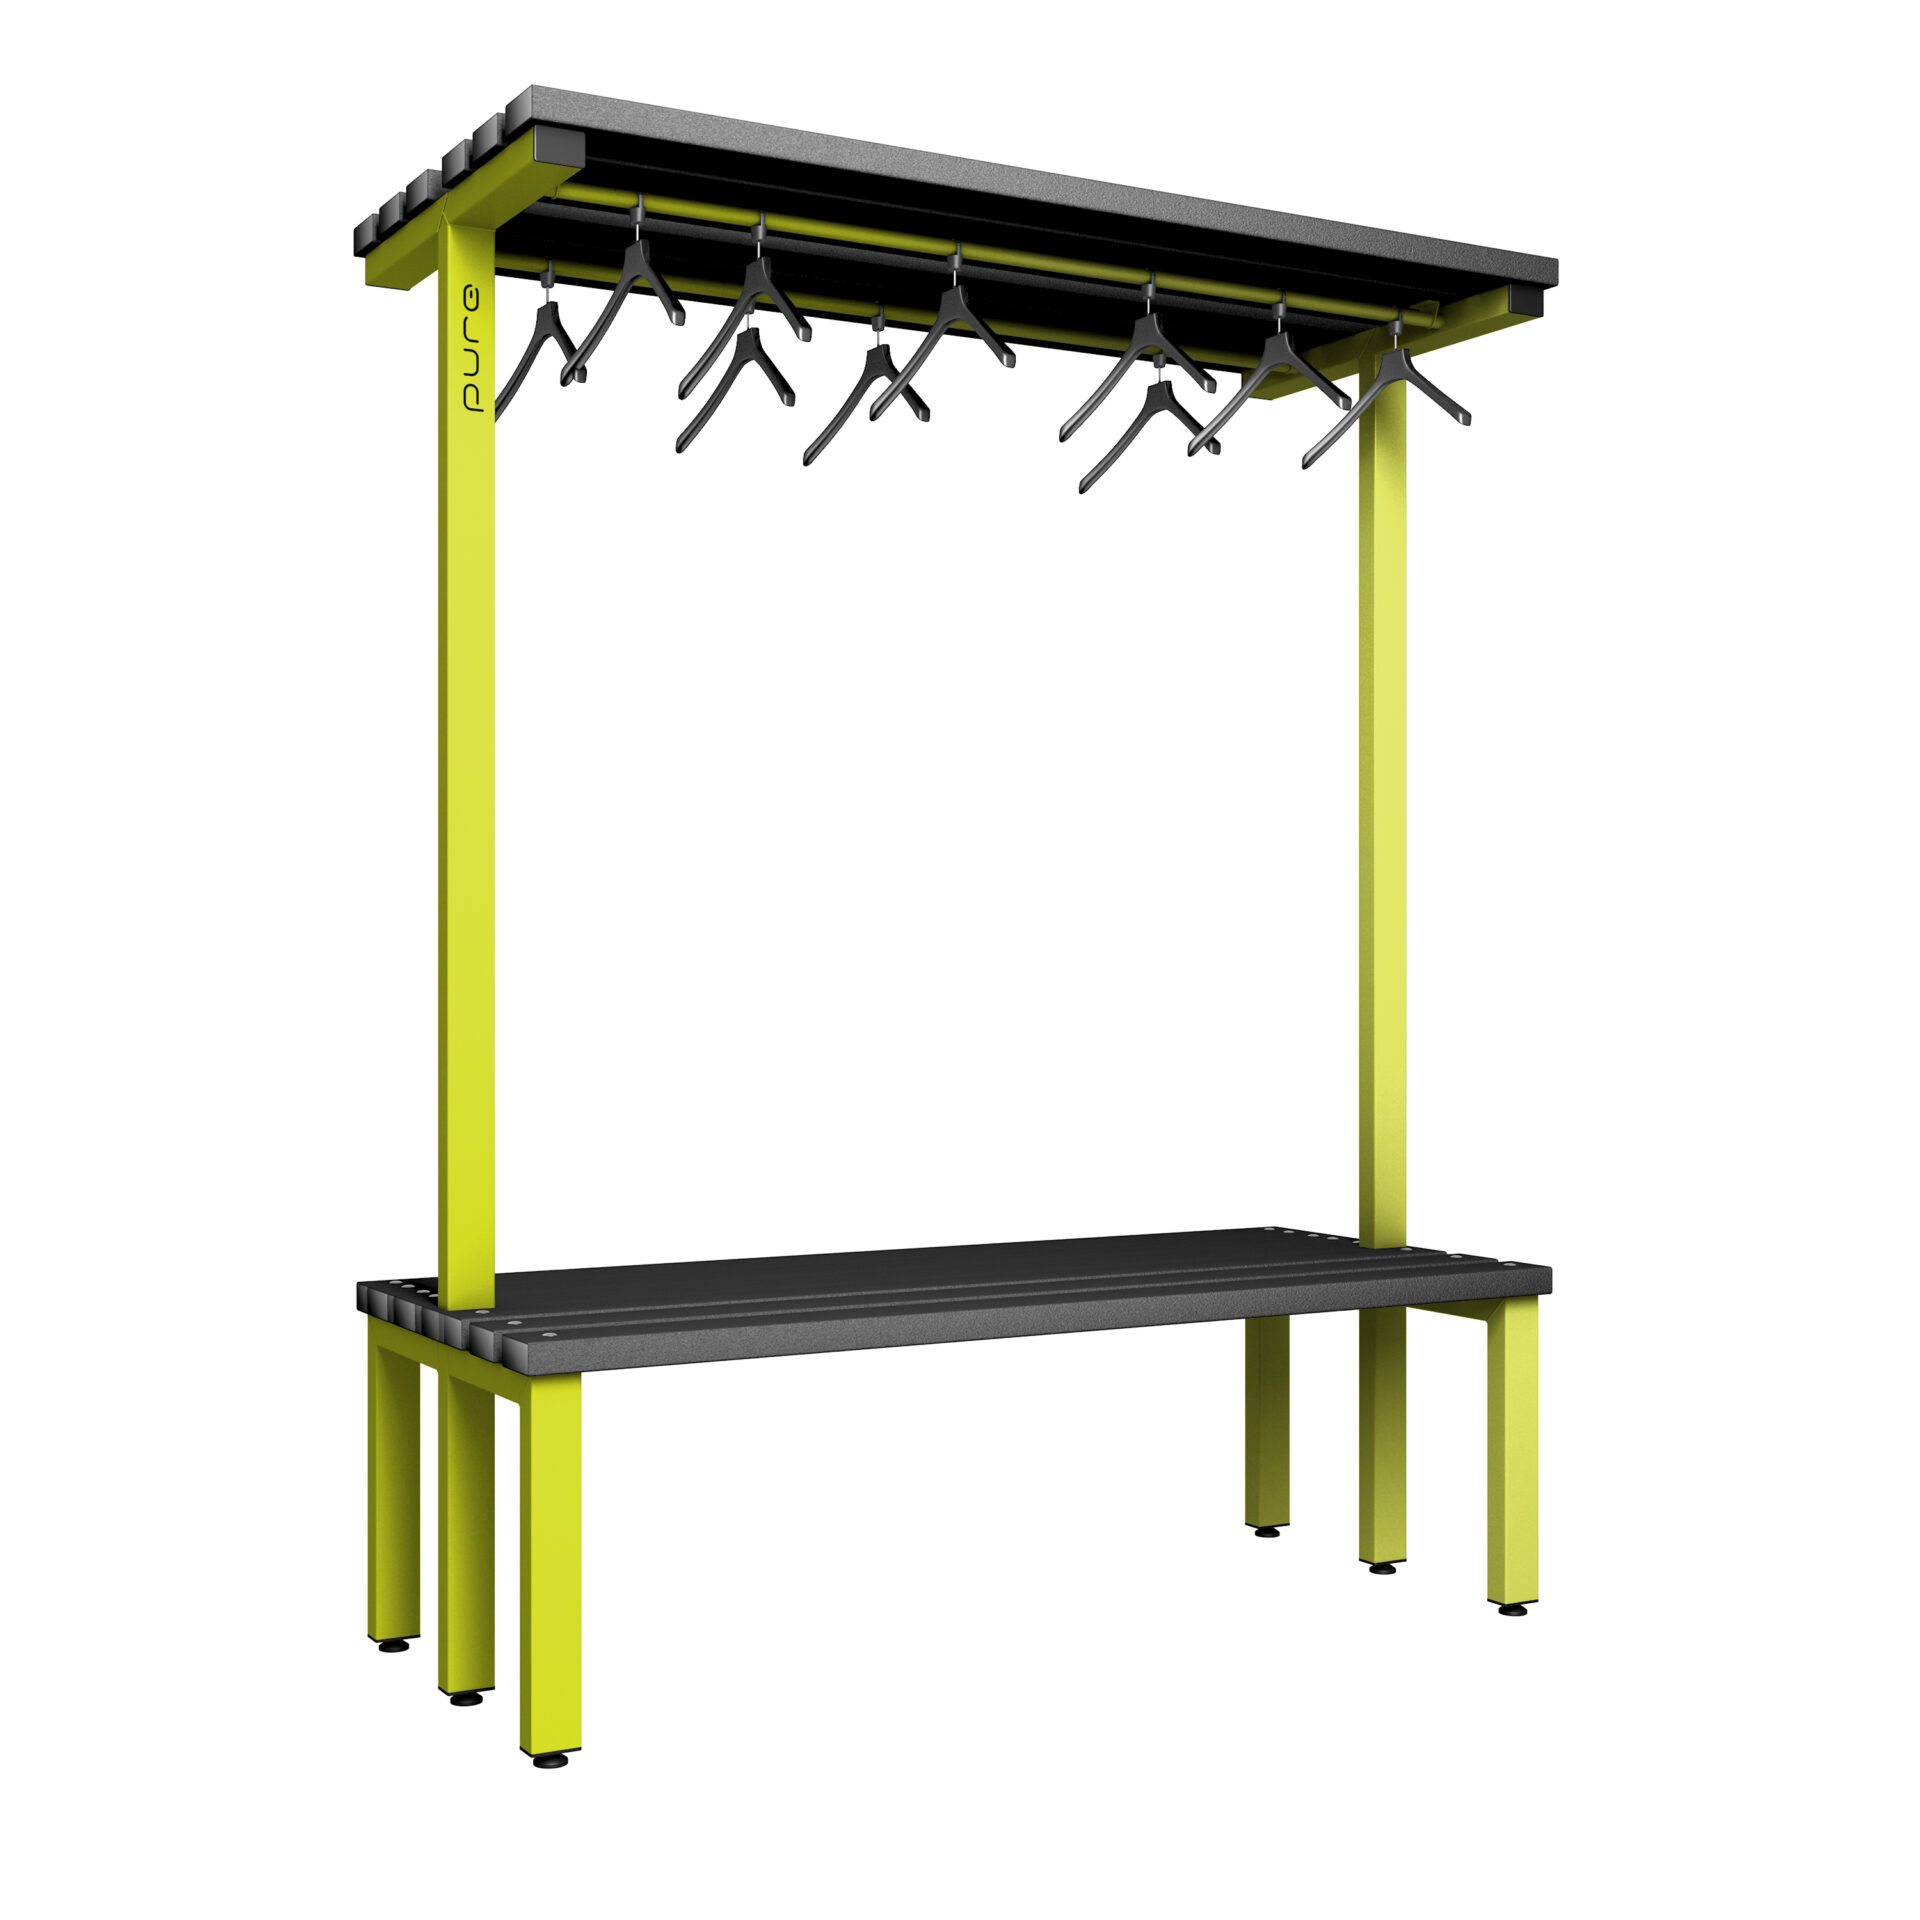 Pure Carbon Zero Double Sided 1500mm Overhead Hanging Bench